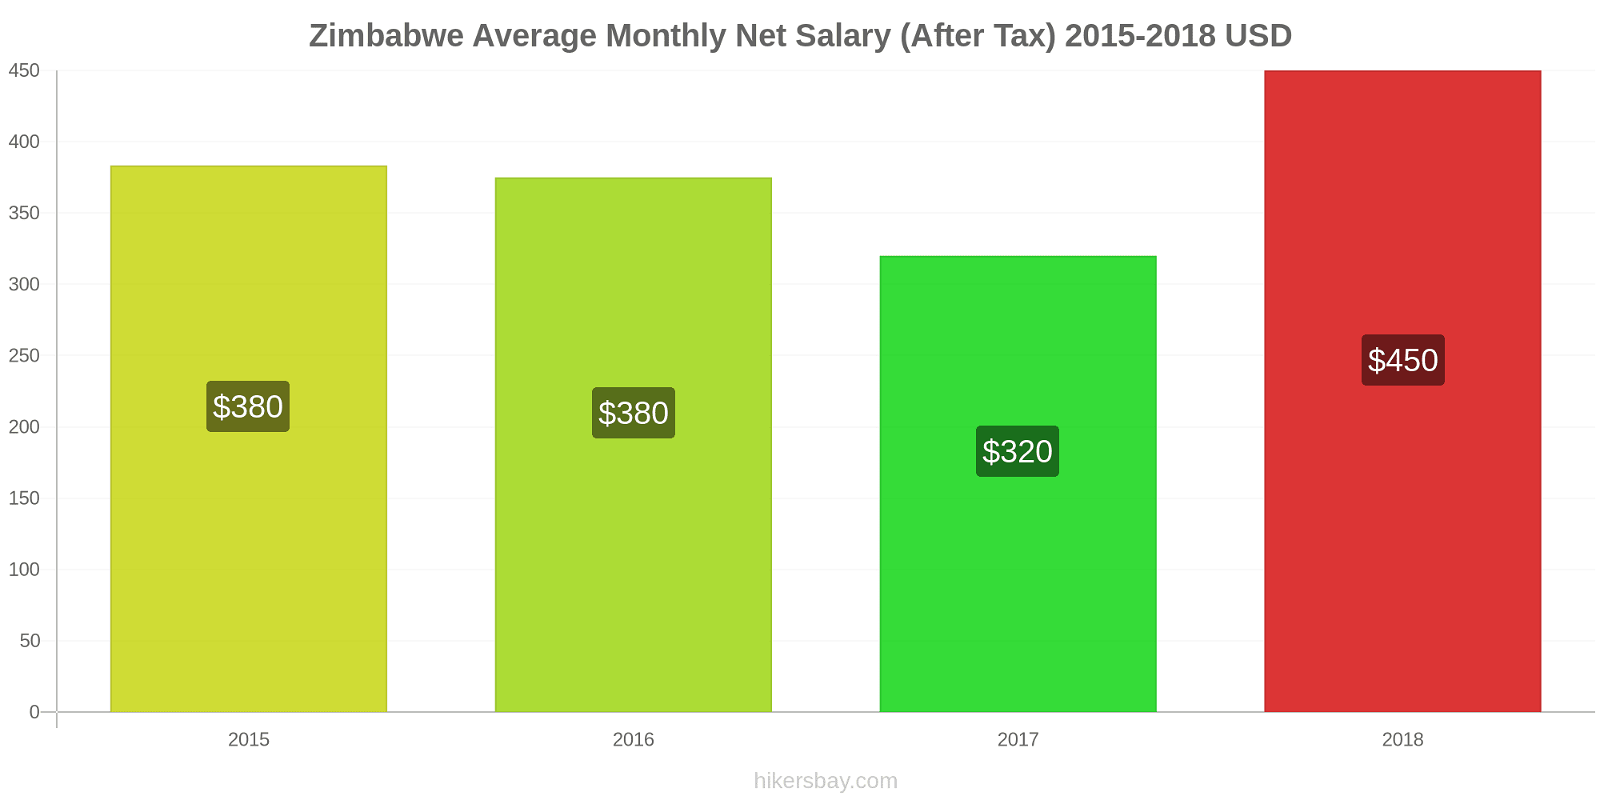 Zimbabwe price changes Average Monthly Net Salary (After Tax) hikersbay.com